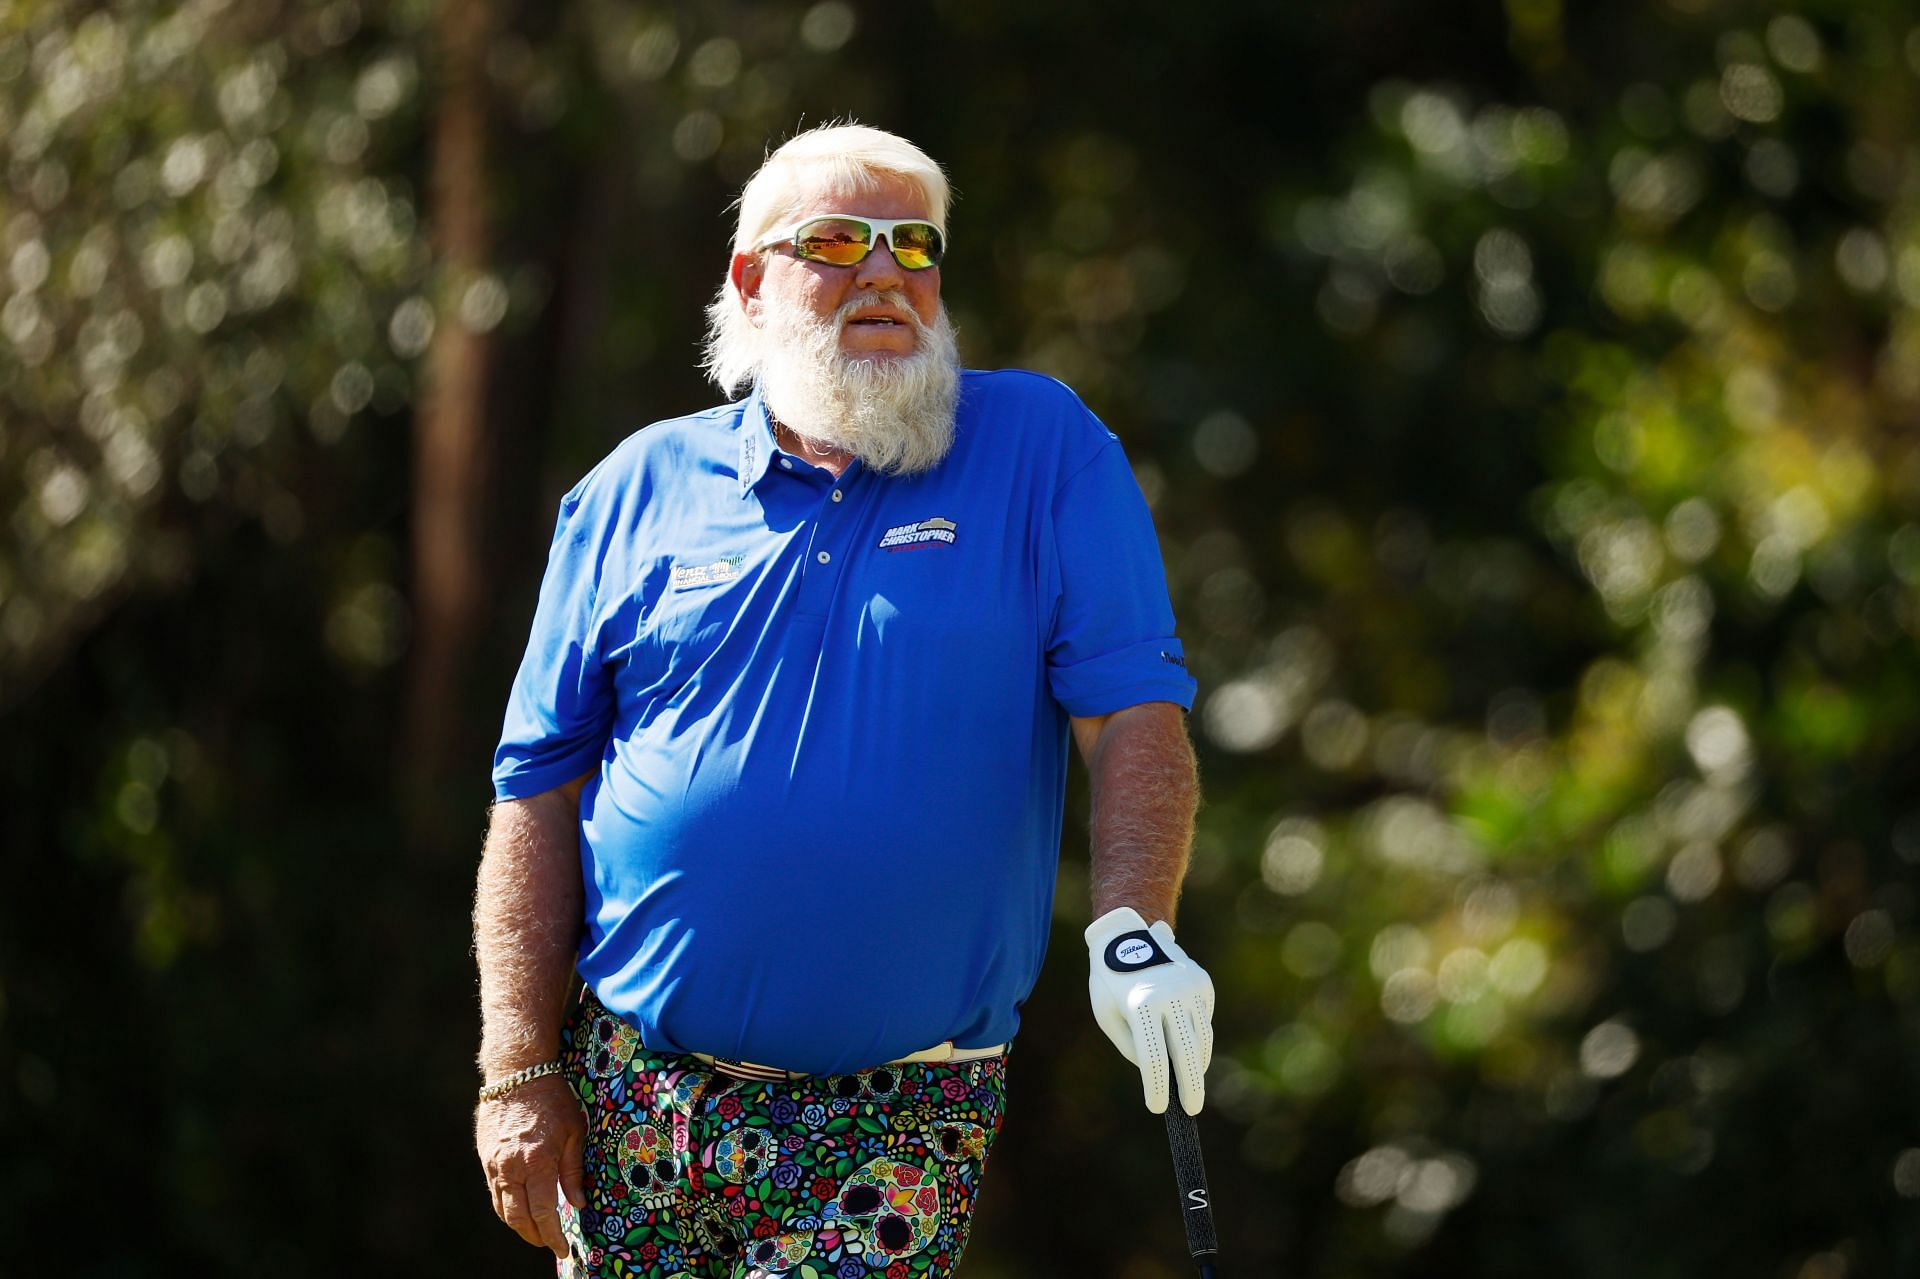 John Daly Transphobic Comment: What Did He Say?